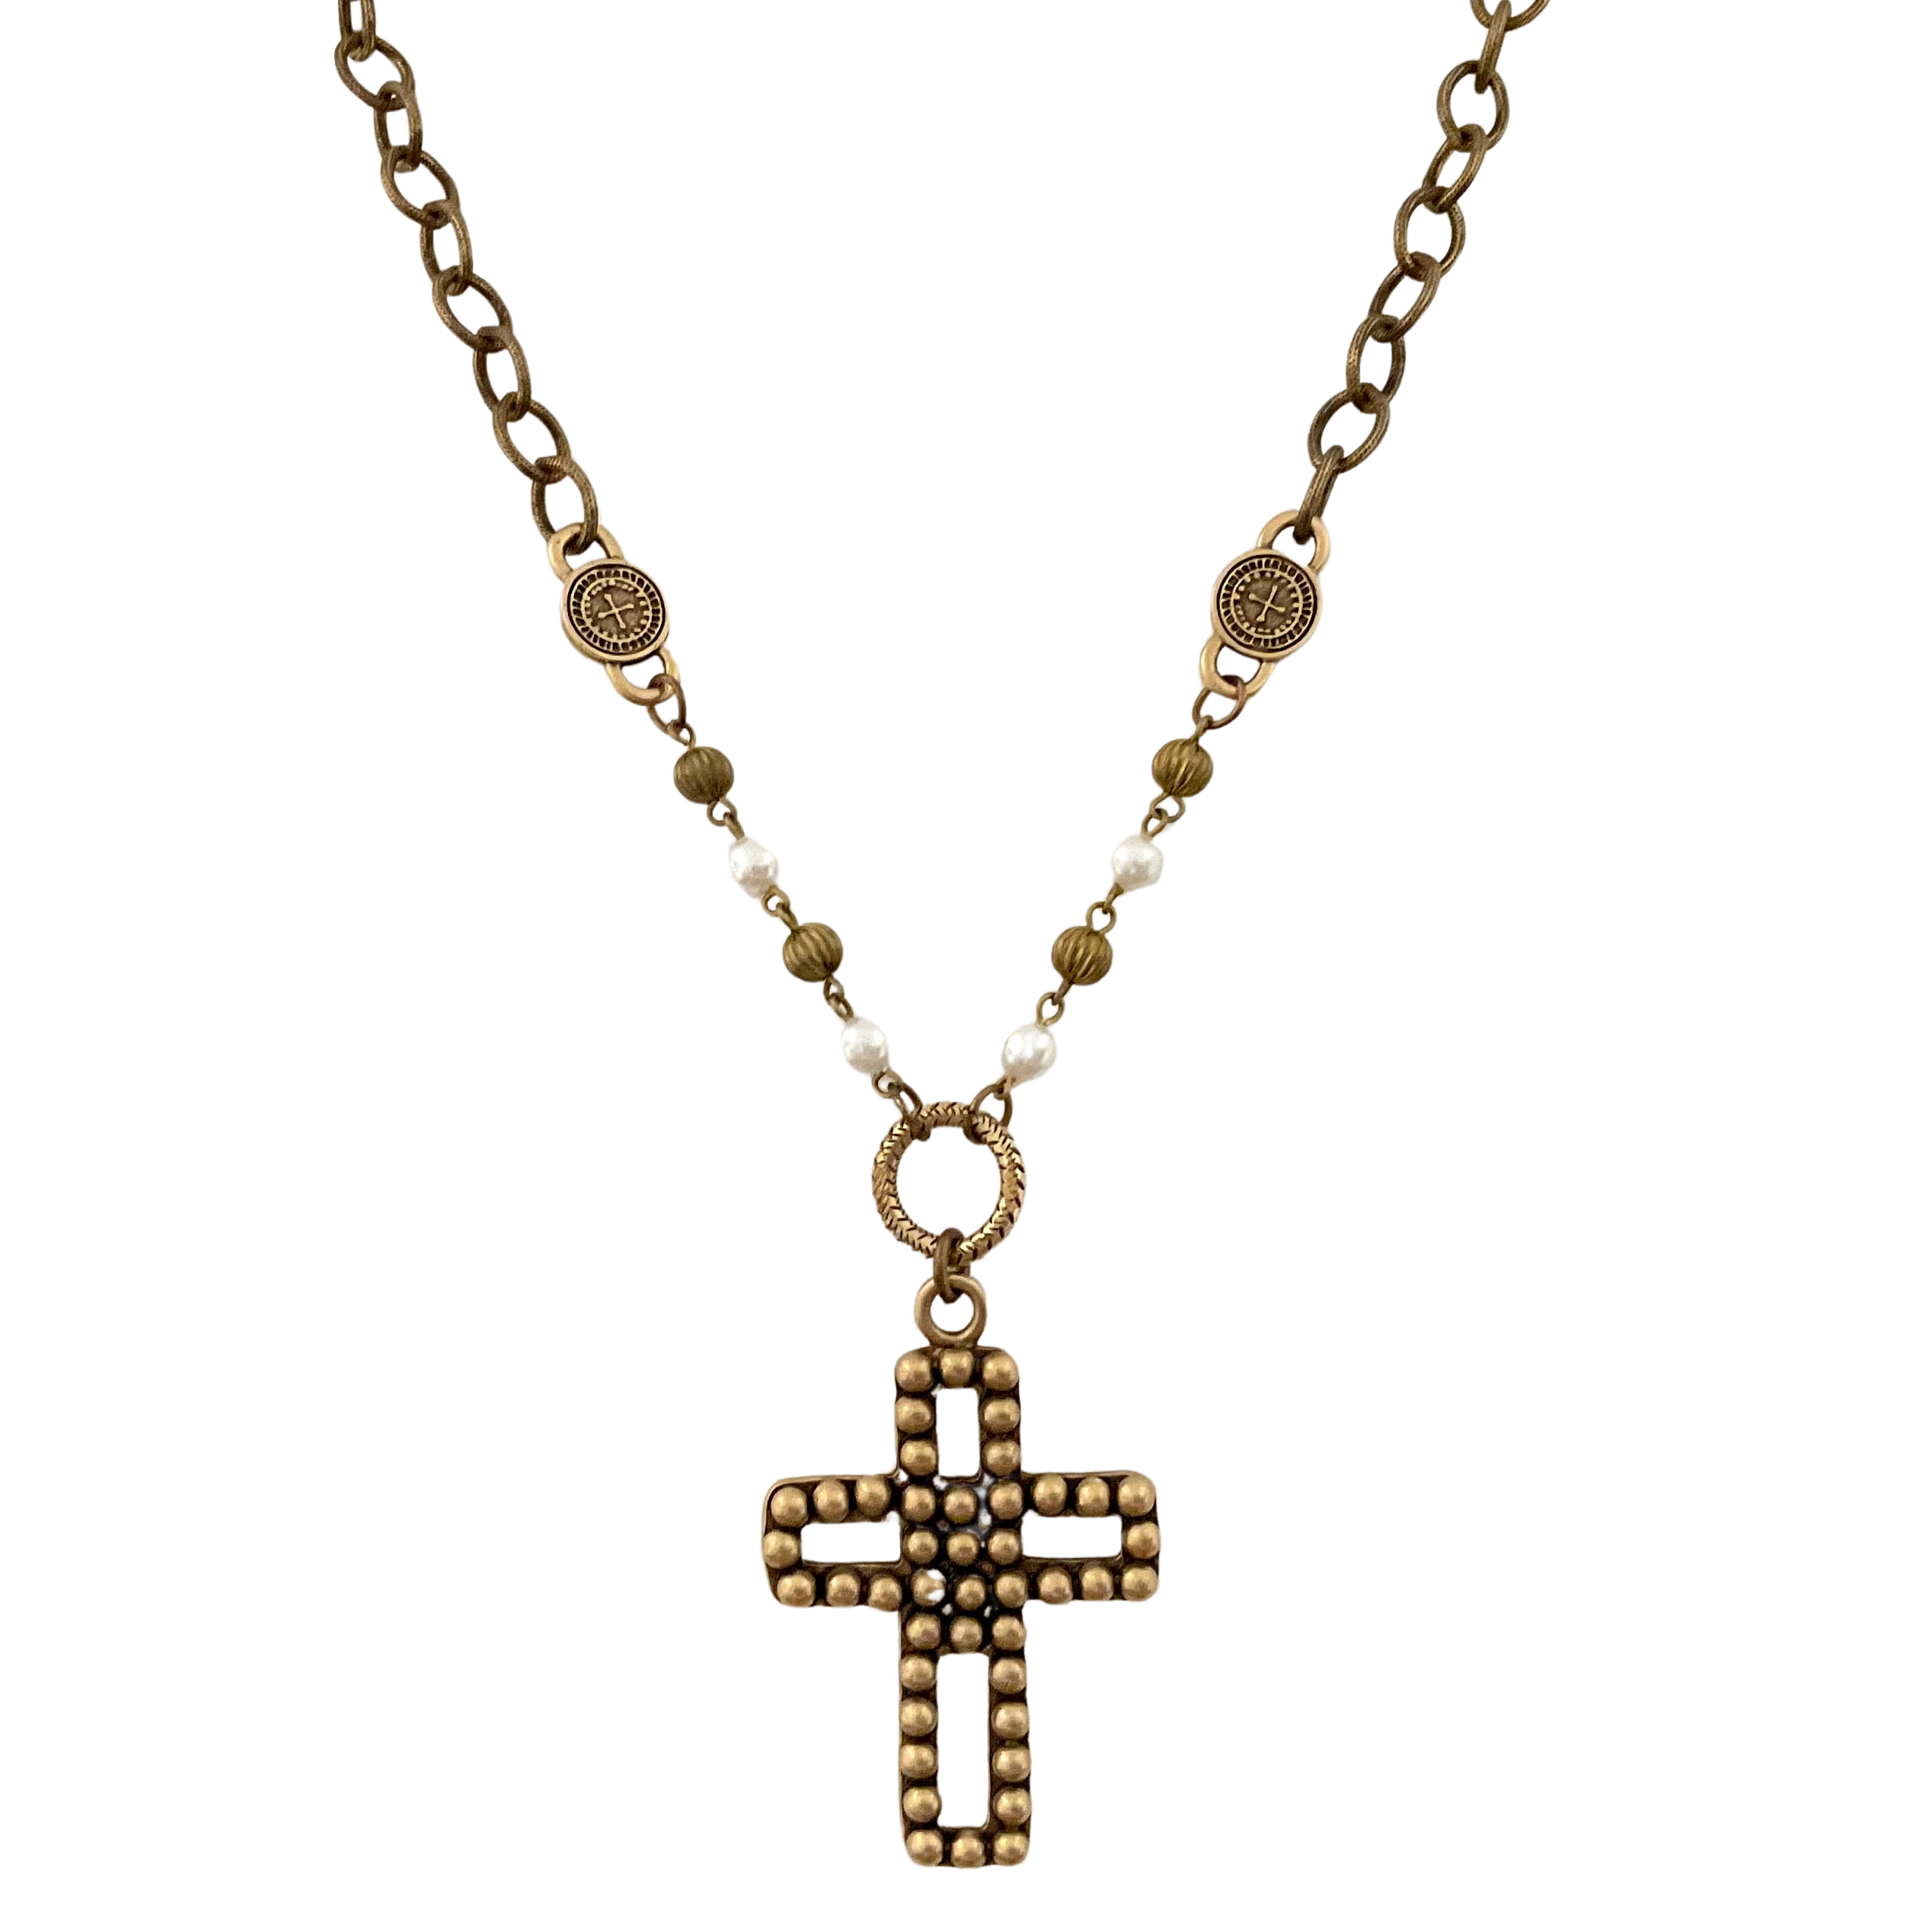 Antique Brass Chain with Vintage Cross Pendant 38